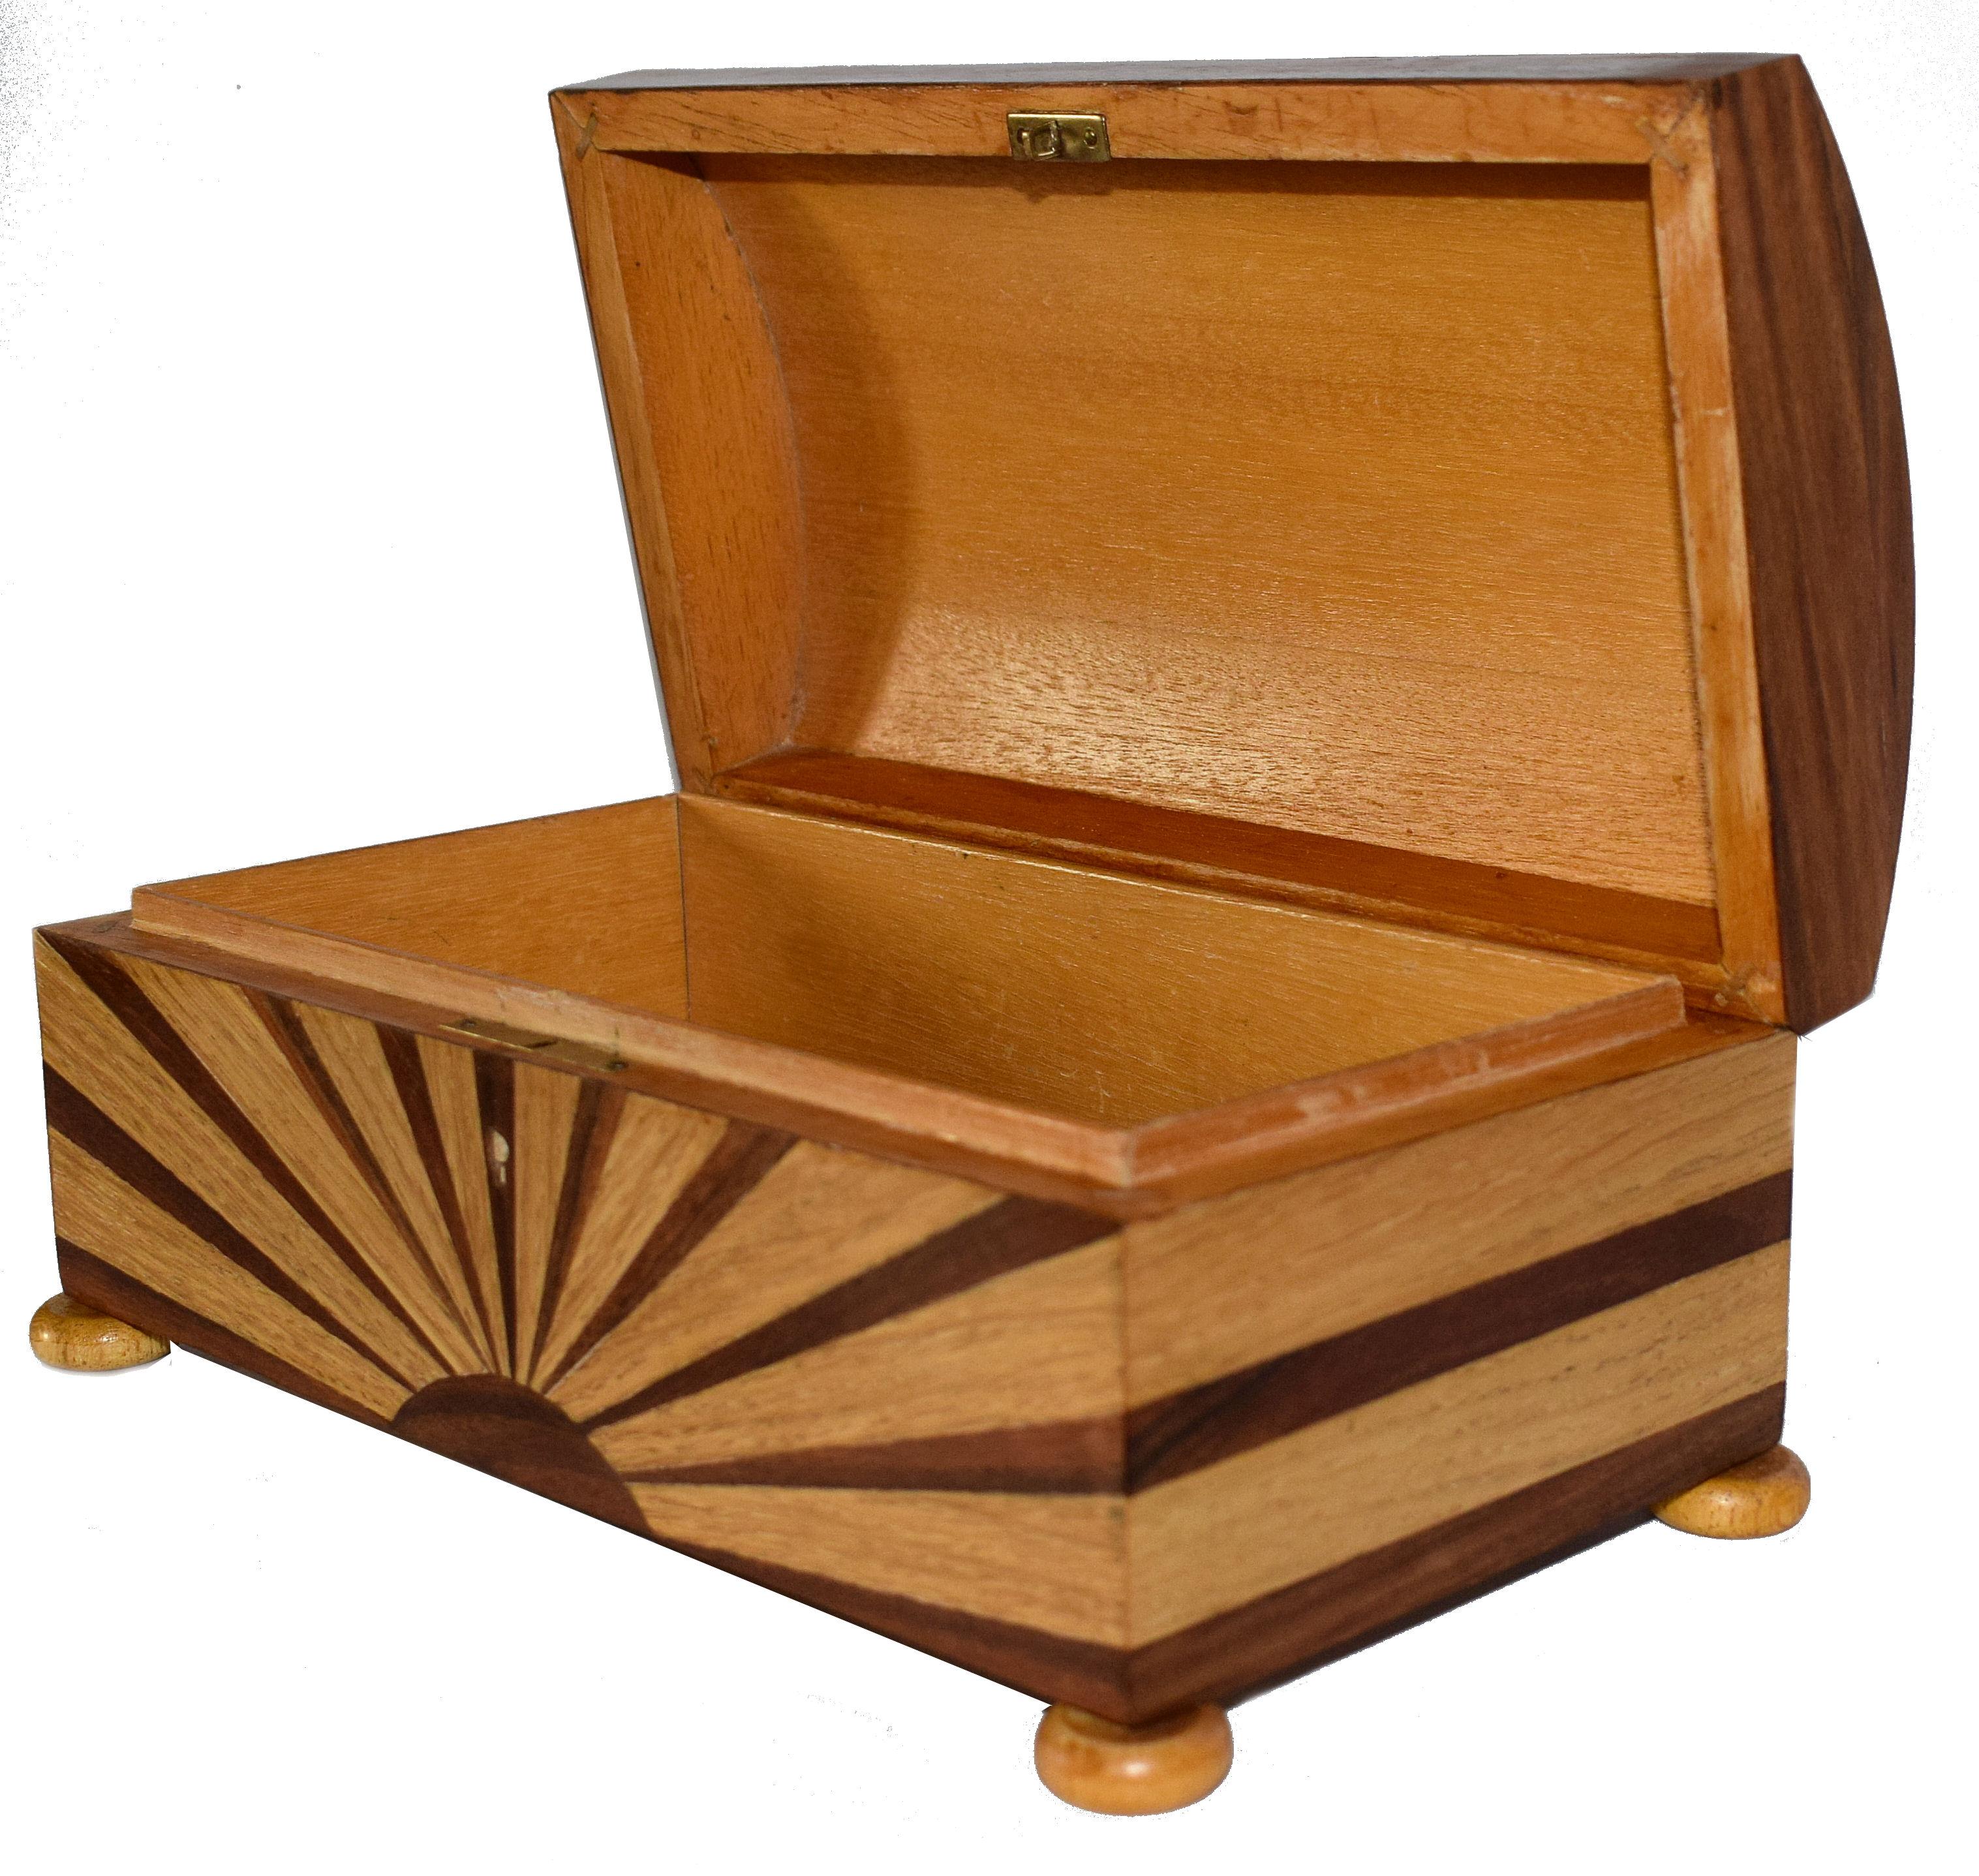 For your consideration is this superbly crafted Art Deco wooden box with a domed lid and iconic sunray pattern which is both to the front and back. This box is a great size and making it a very functional piece, many possible uses such as jewellery,